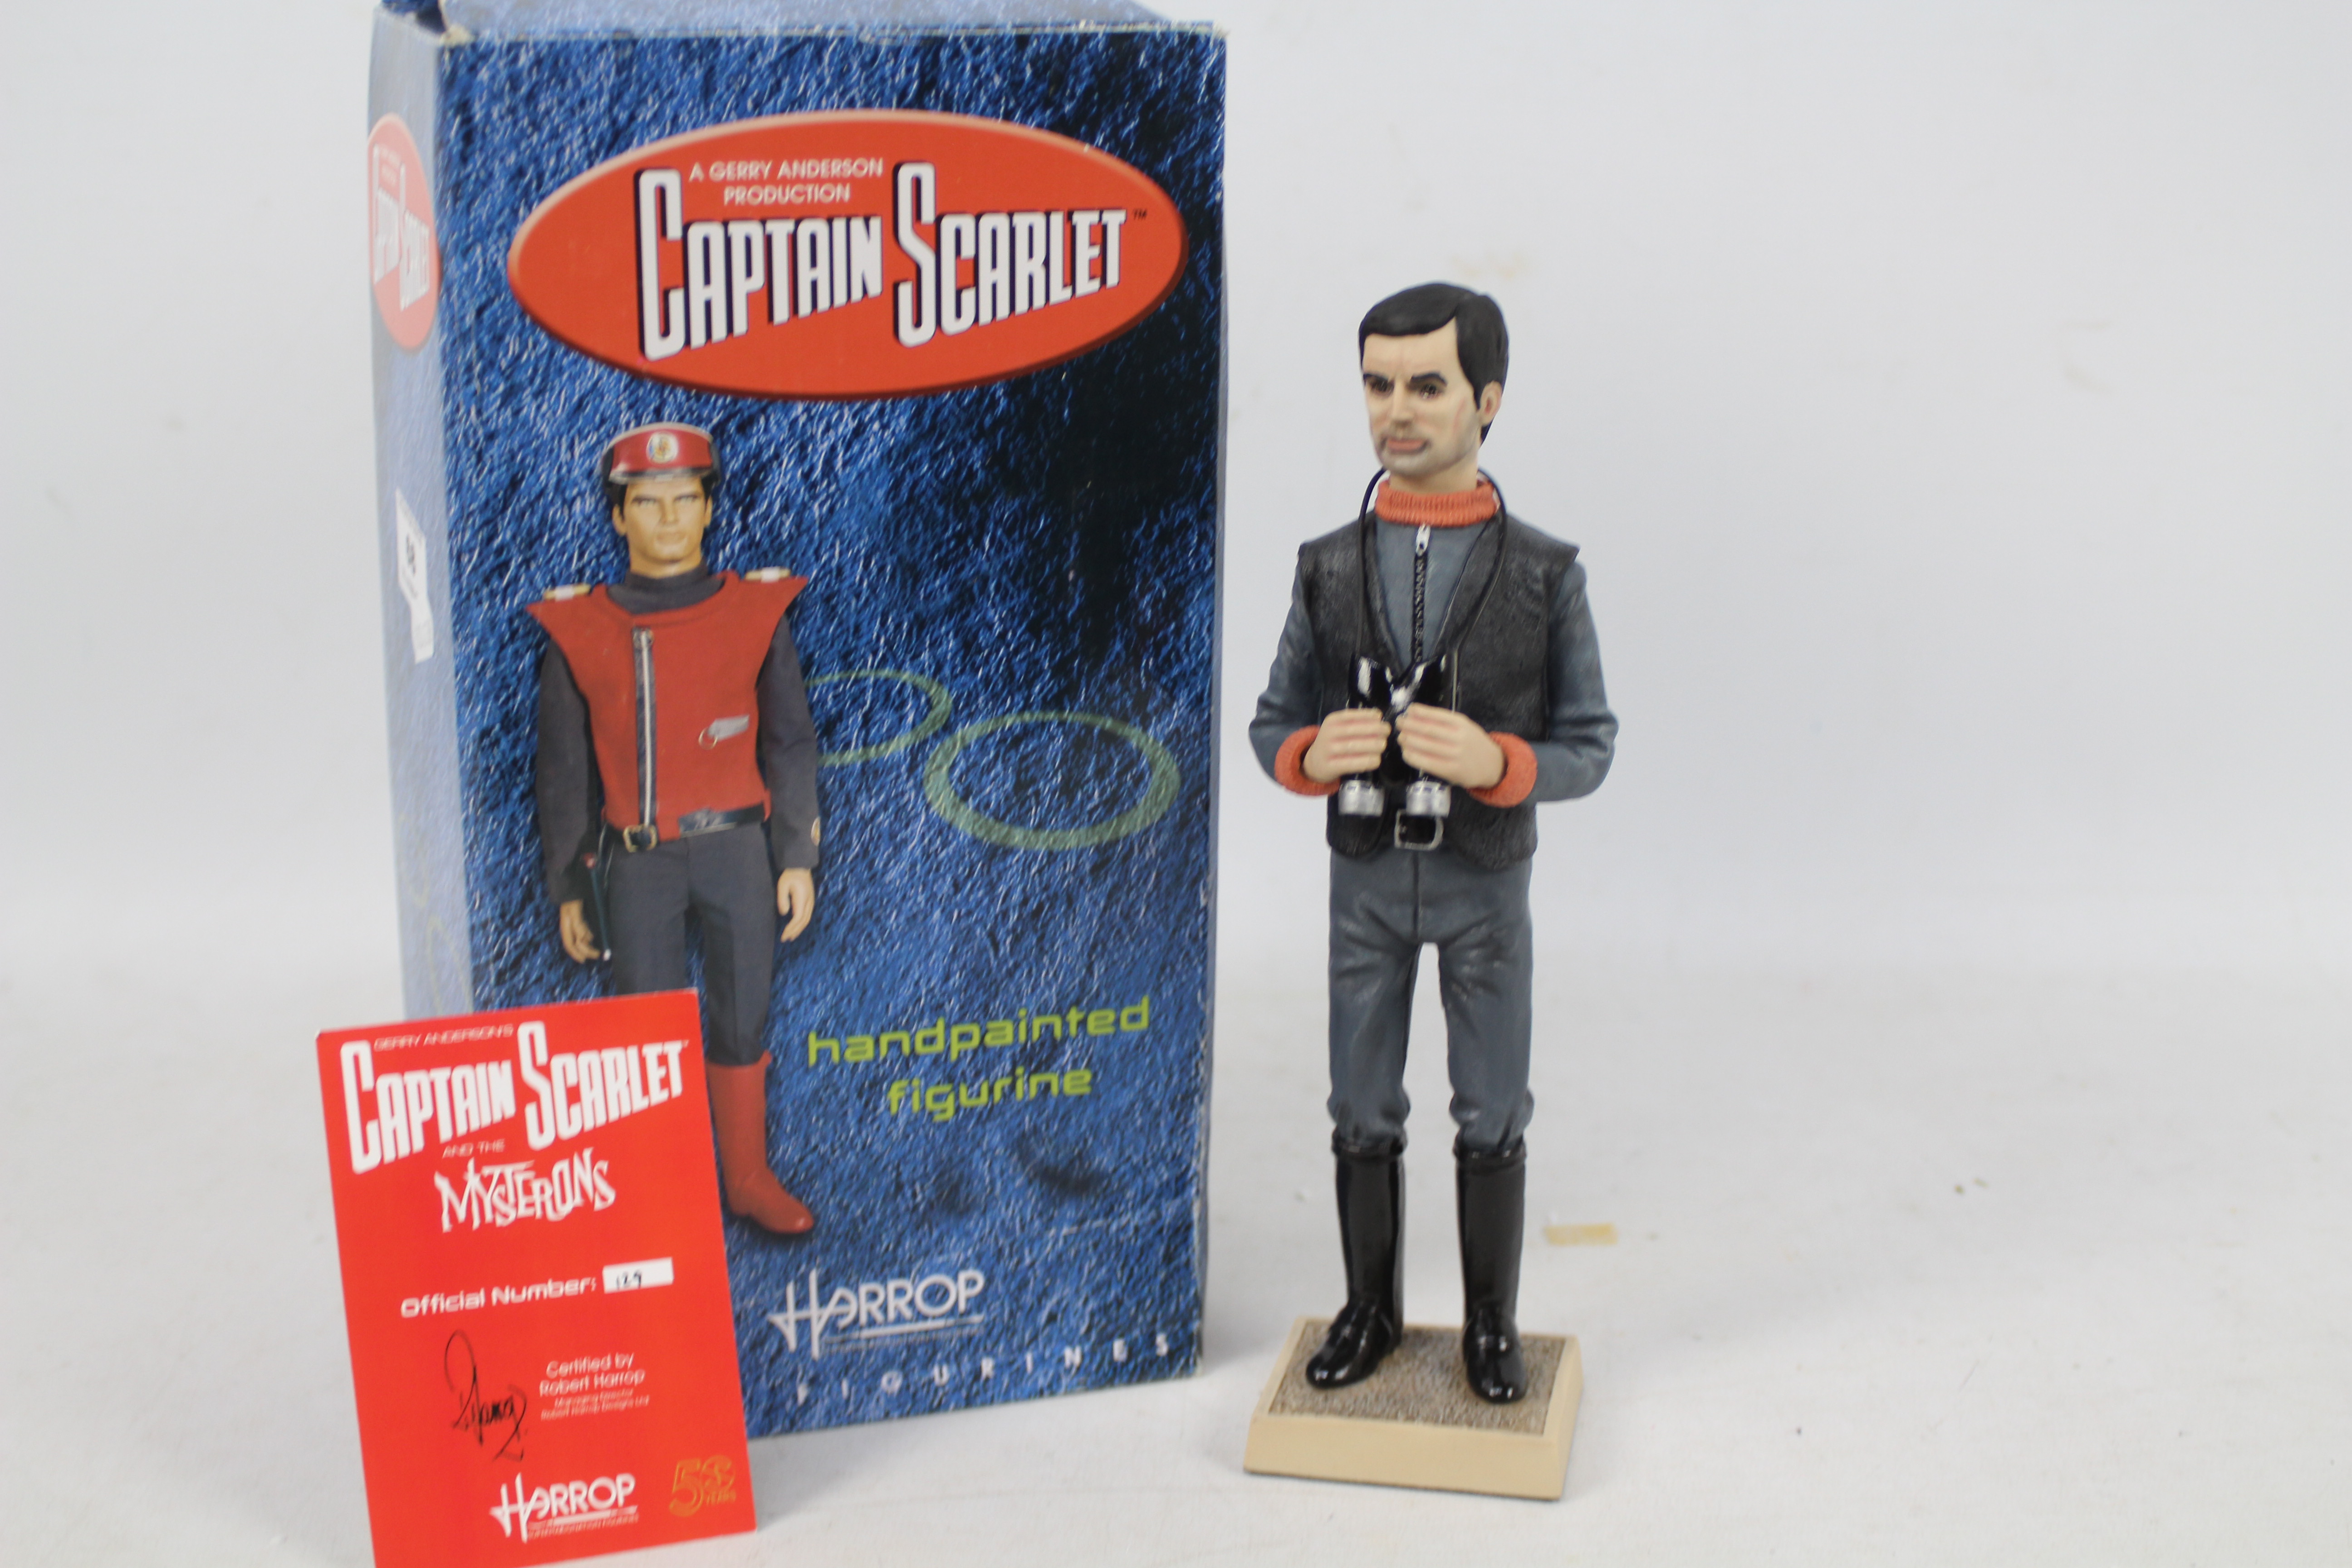 Captain Scarlet - A limited edition Robert Harrop figure of Captain Black from the Gerry Anderson